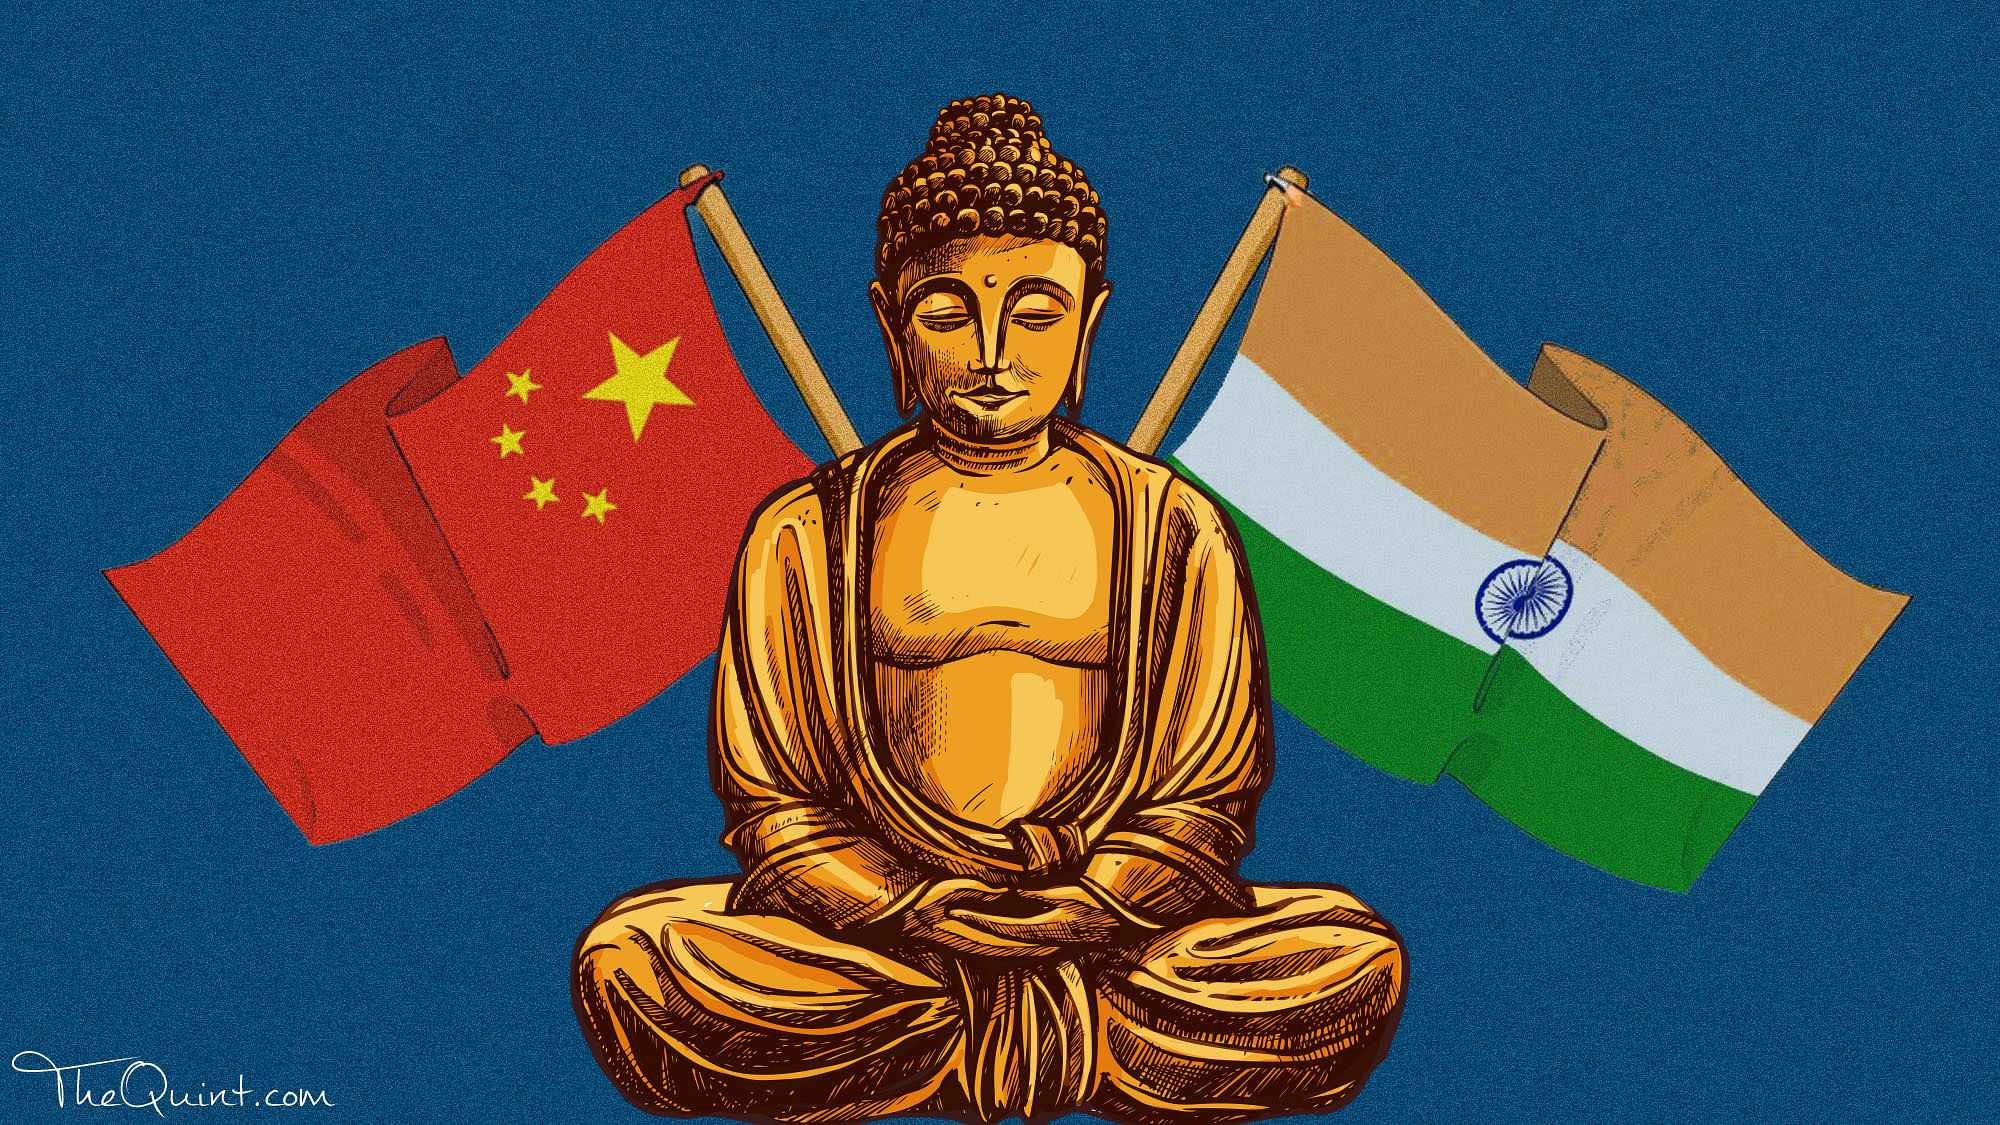 Buddha’s principle – ‘there are no losers in an ideal war, only winners’ – stands true as the Doklam crisis comes to an end.